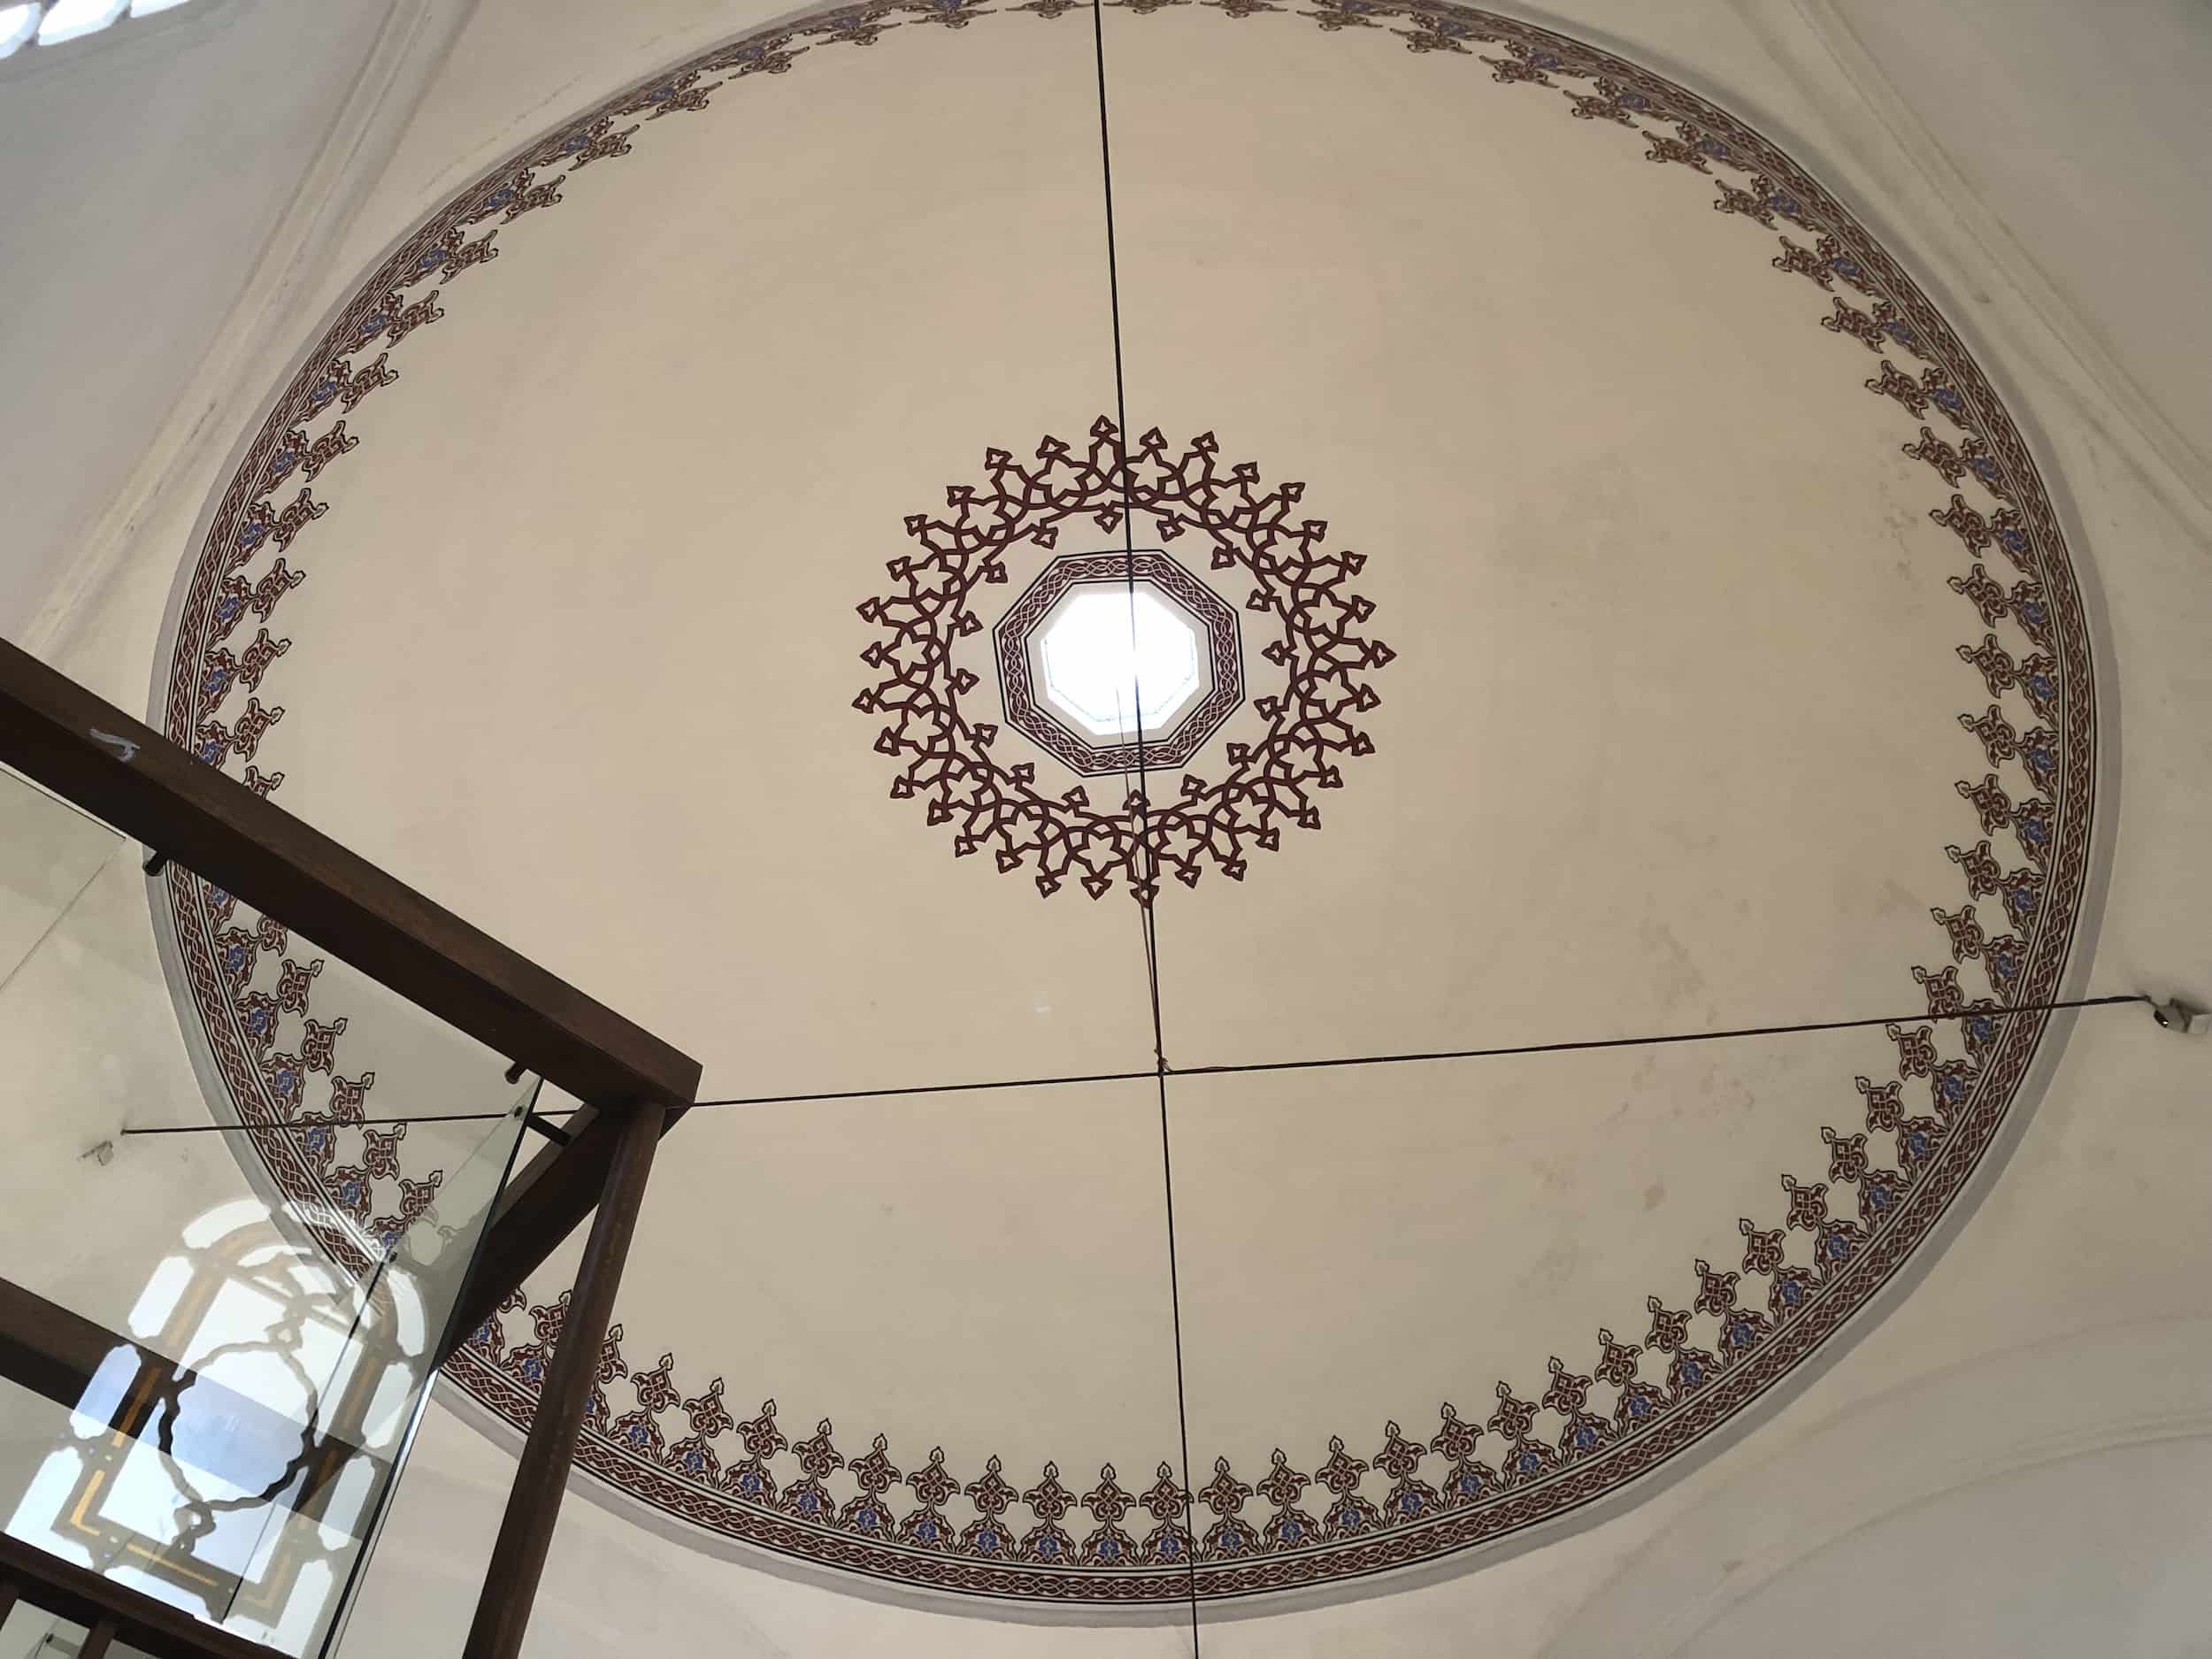 Dome of the women's undressing room at the Bayezid II Hamam (Bayezid II Turkish Bath Cultural Museum) in Beyazıt, Istanbul, Turkey